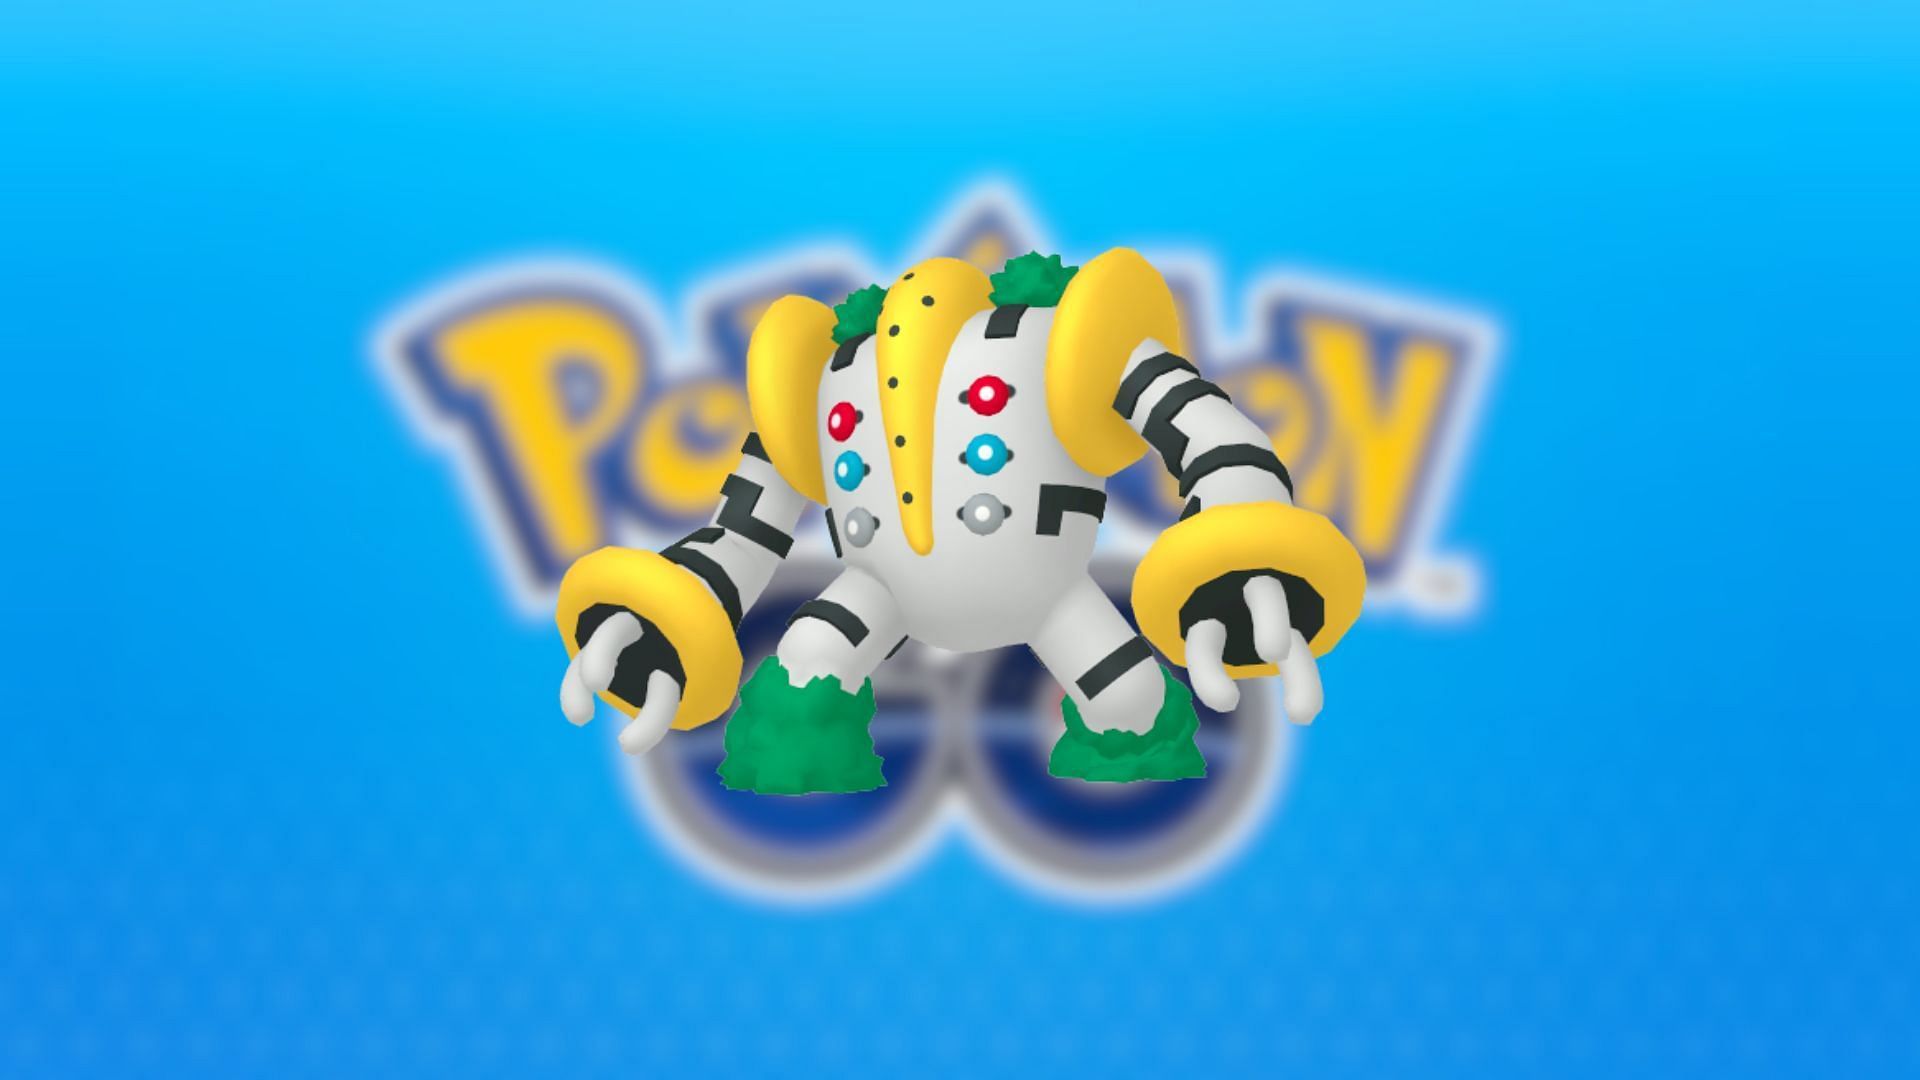 Regigigas gets a weather boost in Partly Cloudy (Image via The Pokemon Company)